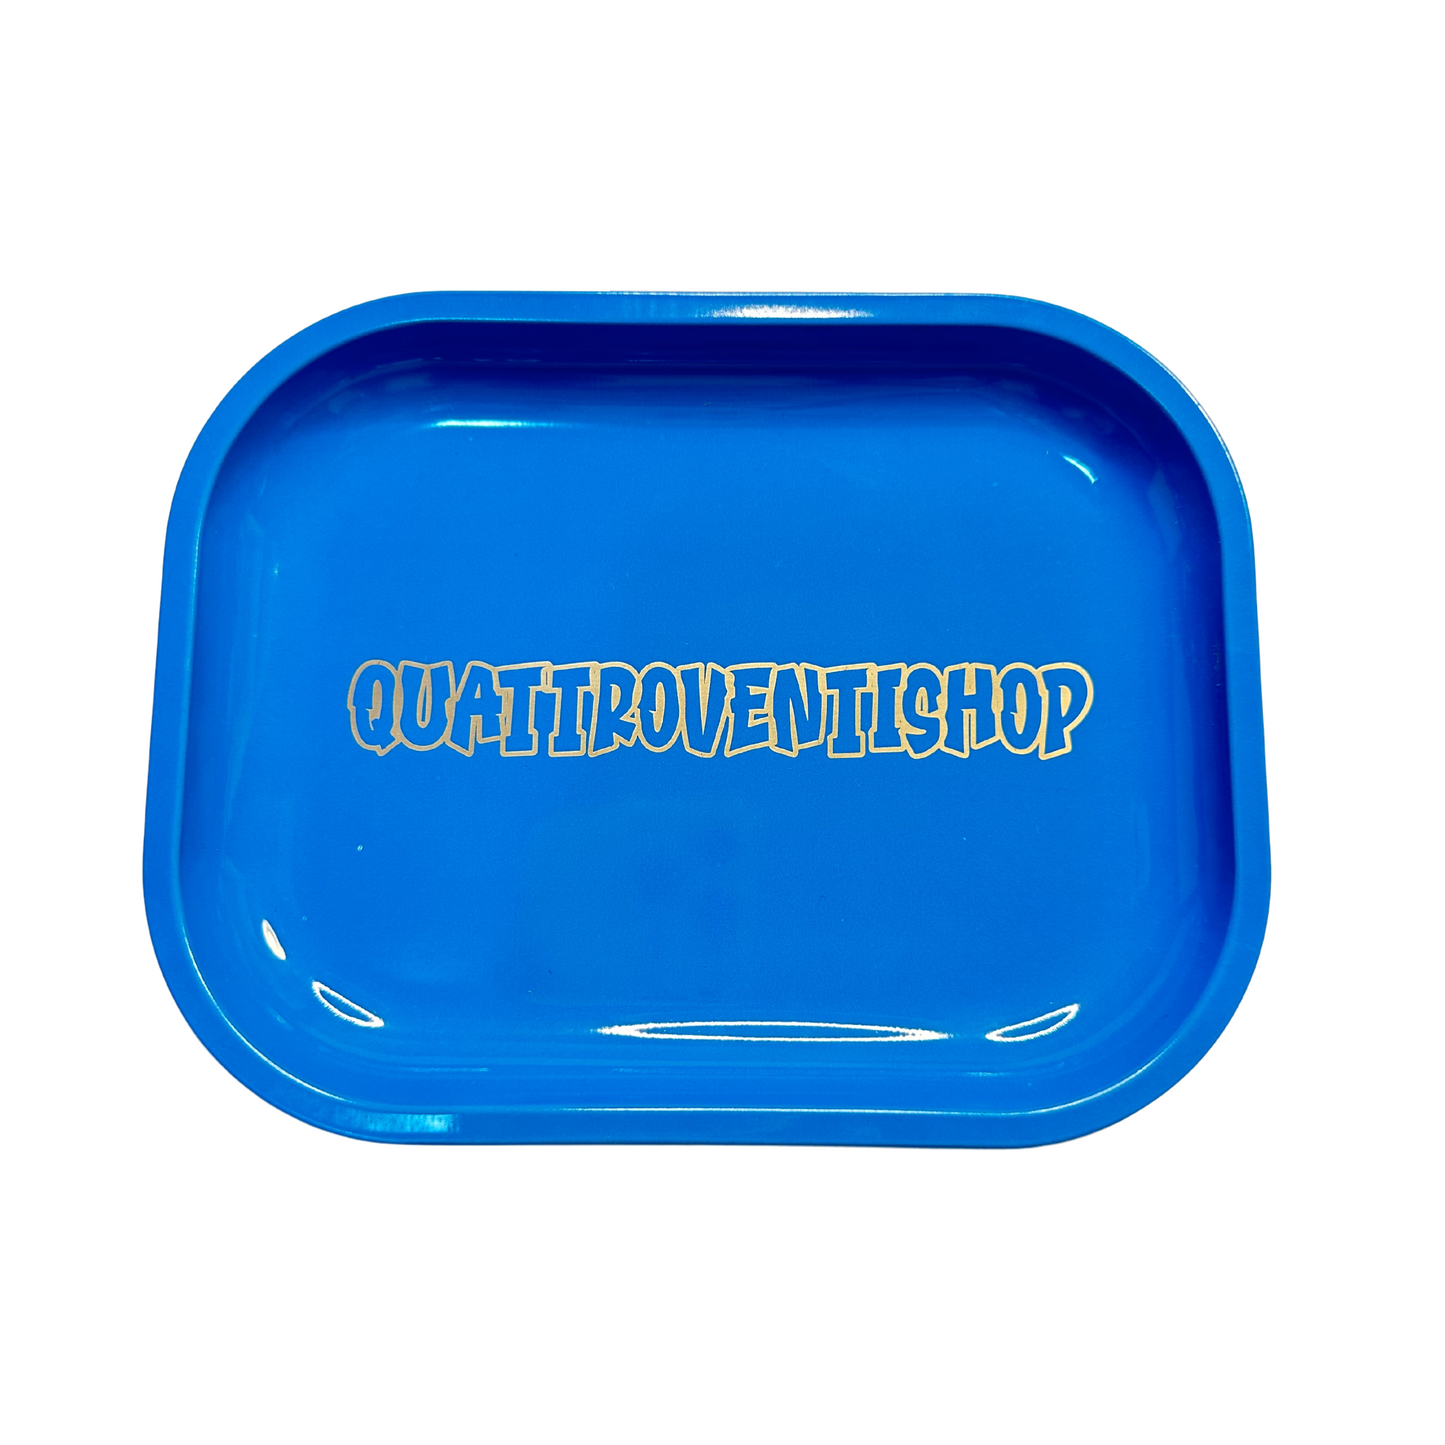 QUATTROVENTISHOP metal tray and magnetic lid